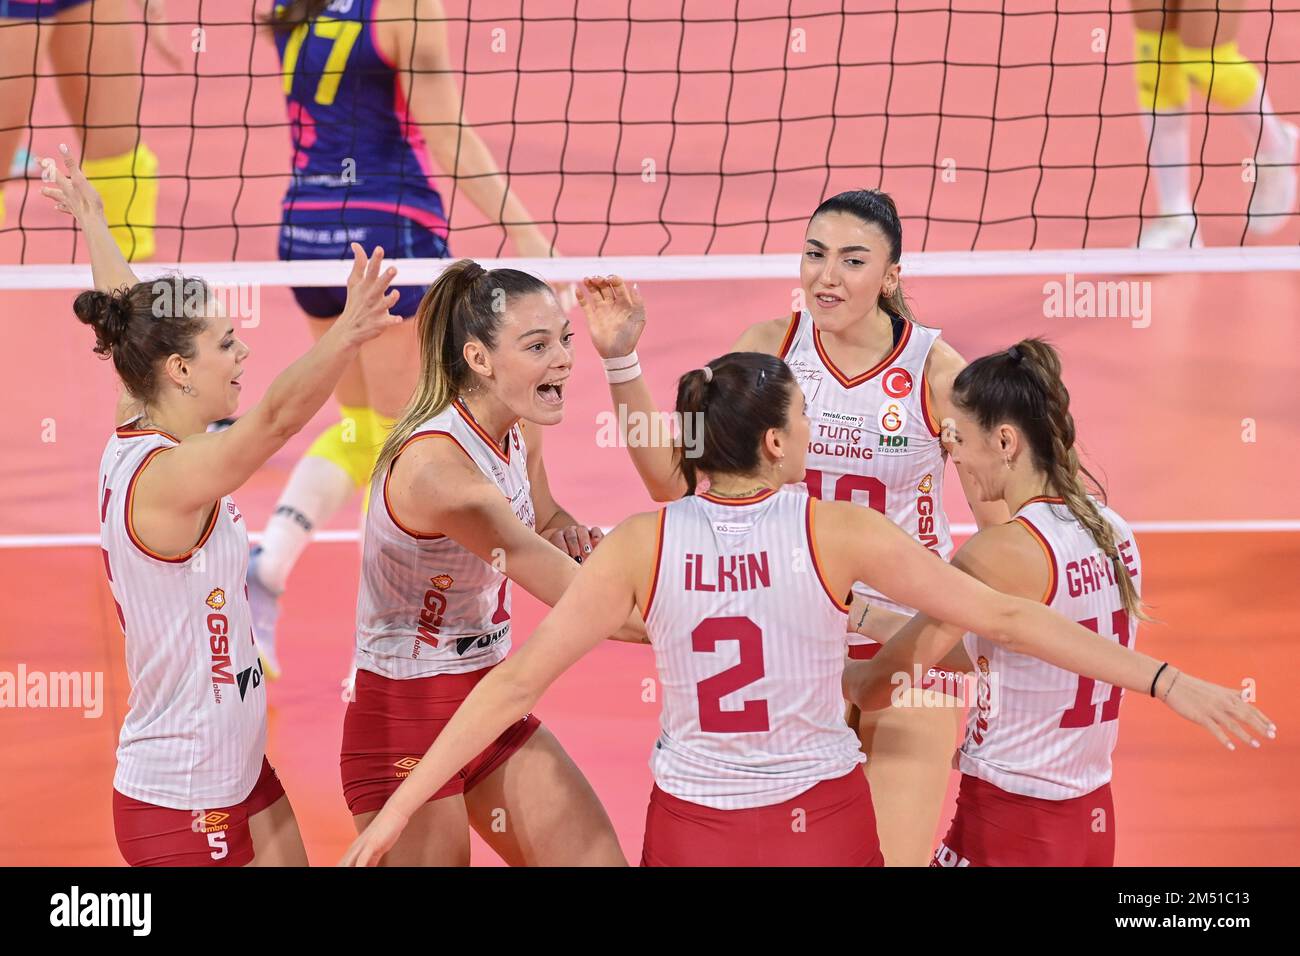 Florence, Italy. 22nd Dec, 2022. Galatasaray HDI Sigorta Istanbul players celebrate during Savino Del Bene Scandicci vs Galatasaray HDI Sigorta Istanbul, Volleyball CEV Cup Women Championship in Florence, Italy, December 22 2022 Credit: Independent Photo Agency/Alamy Live News Stock Photo